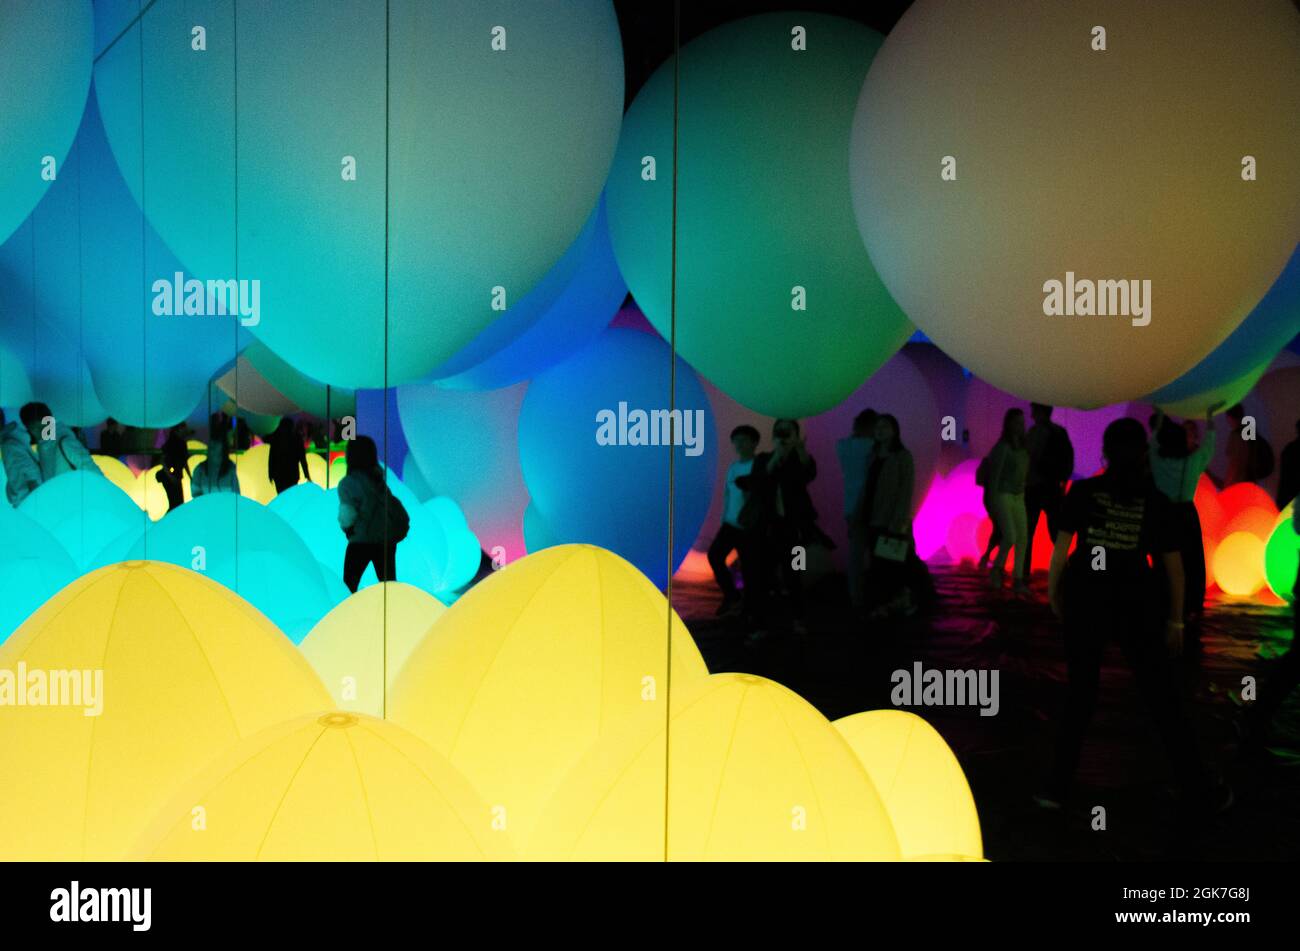 People silhouetted by the extraordinary light displays at the Team Lab Borderless Digital Art Museum, Tokyo, Japan, October Stock Photo